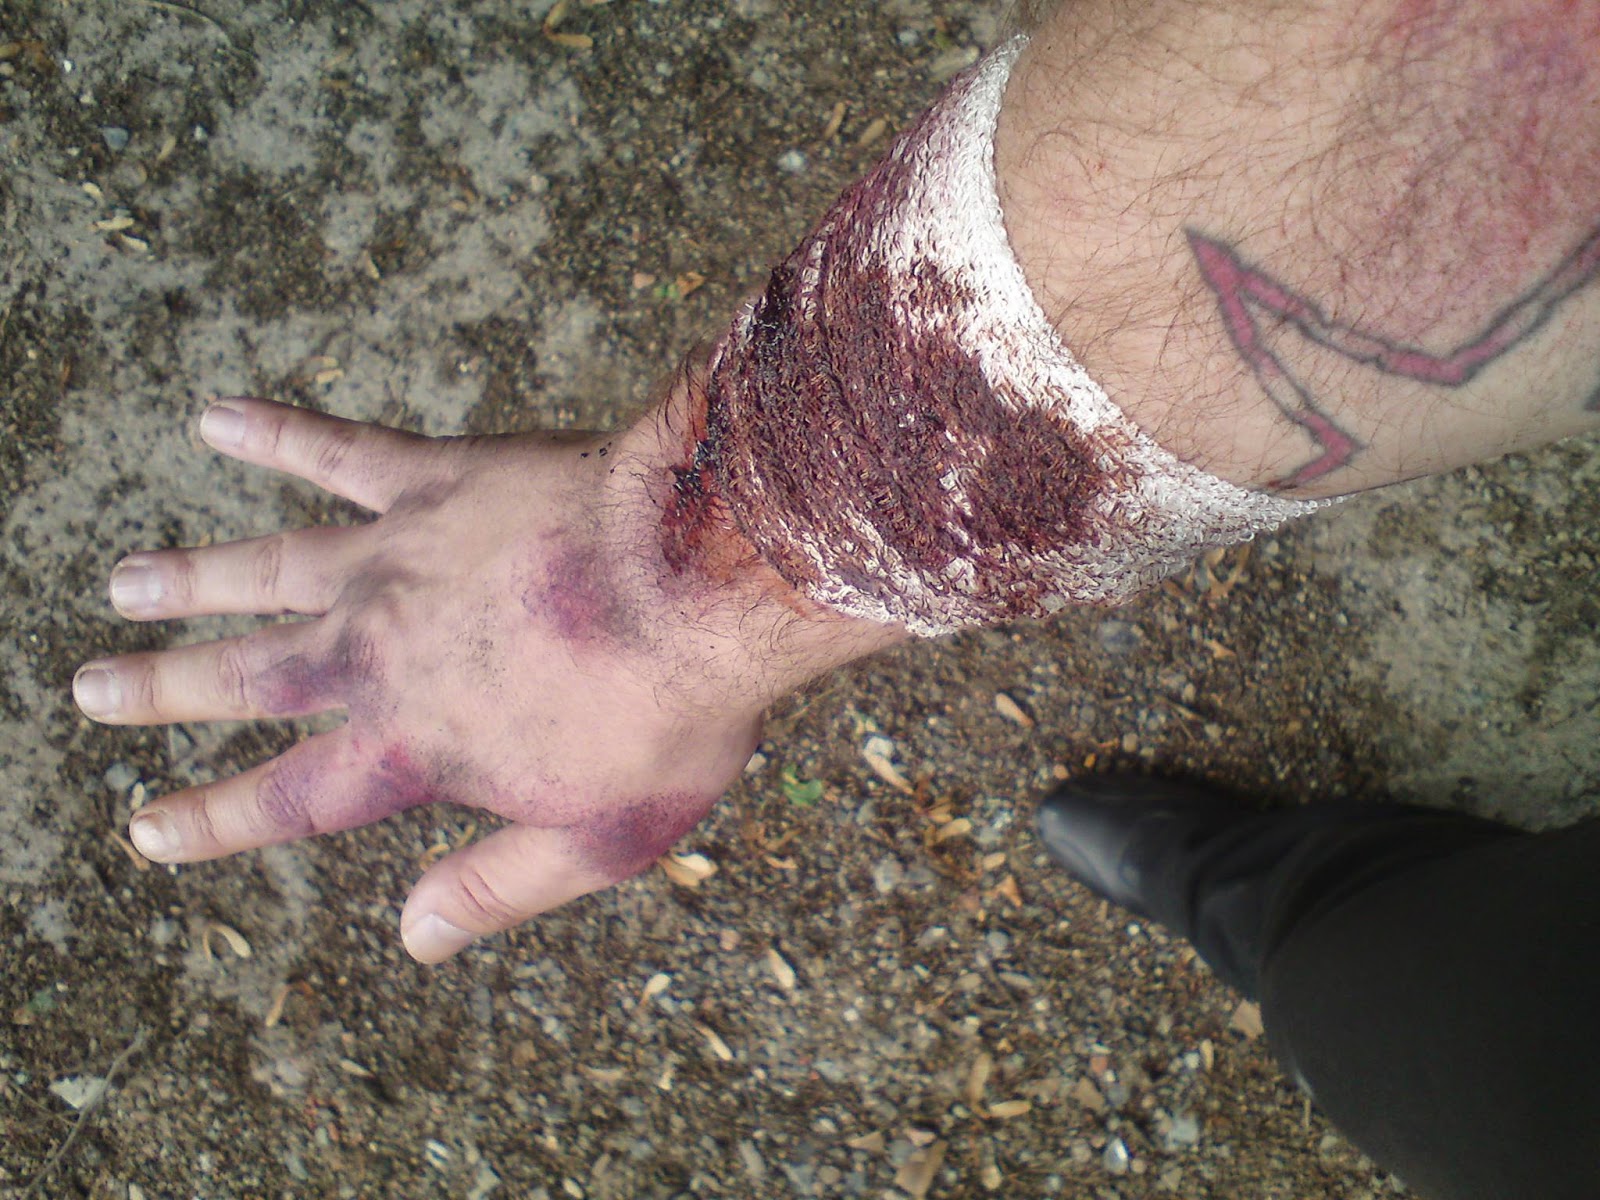 Getting bloody and bruised on an Anthony M Winson photo shoot (2014).